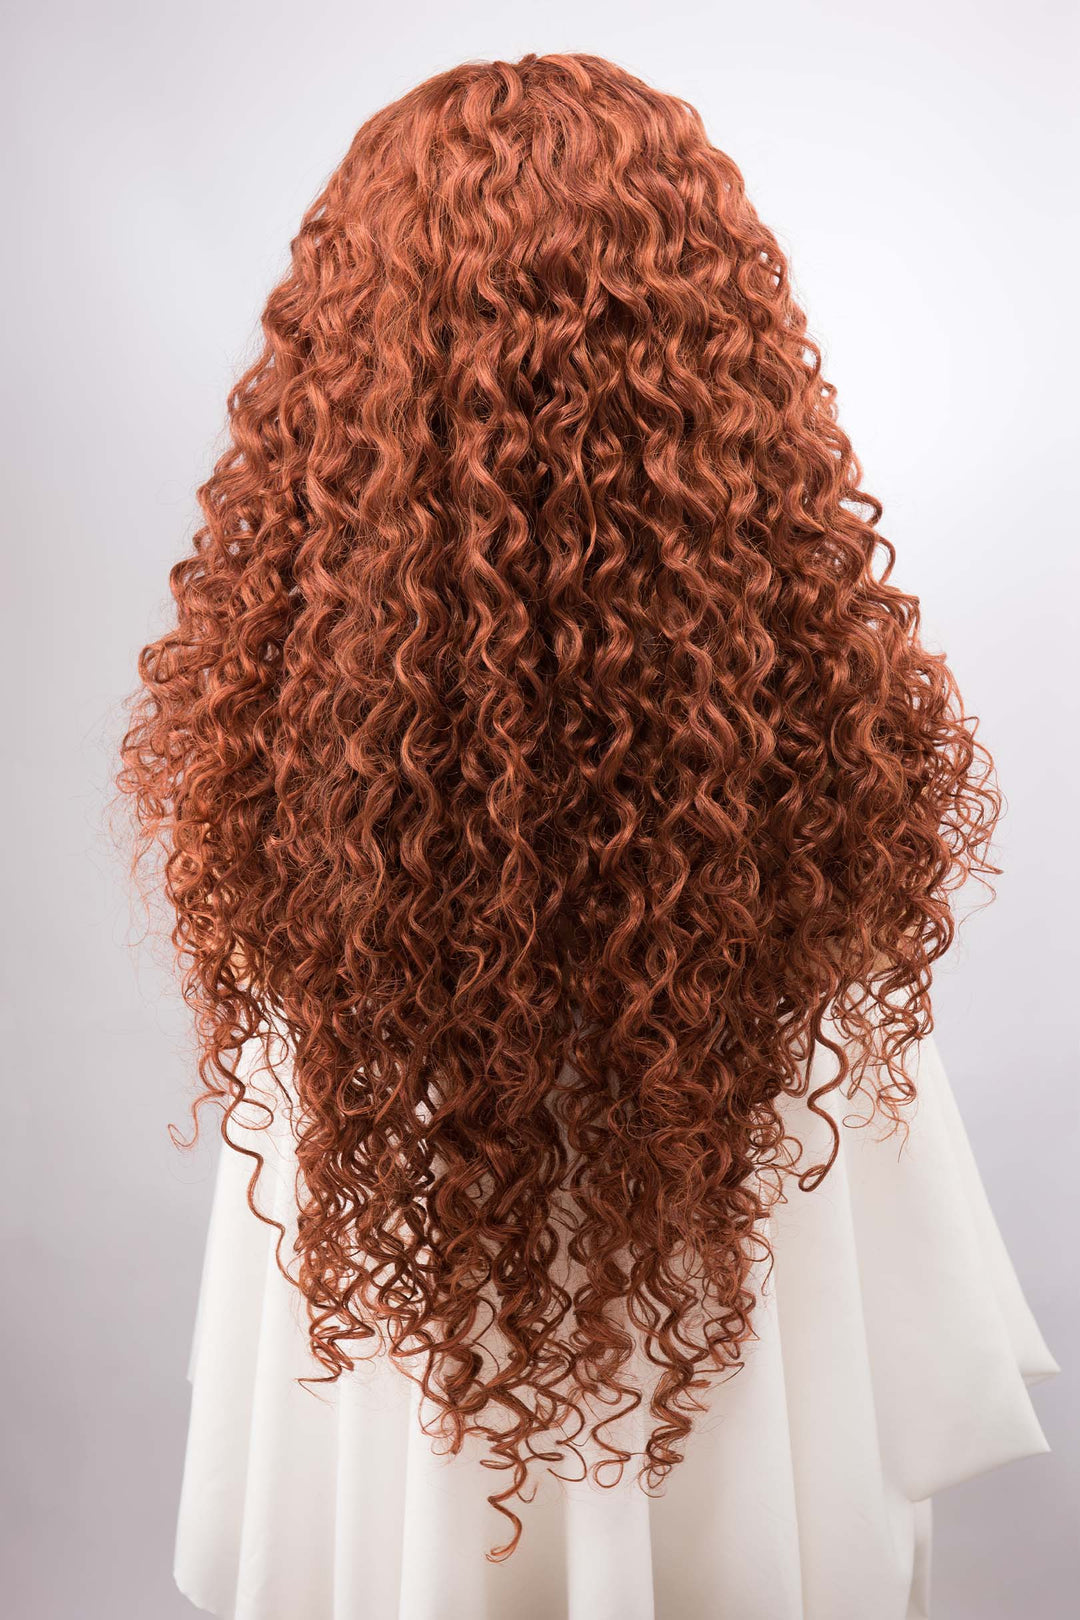 Auburn Ginger Wig Lace Front Curly Wig Orange Copper Wig Merida Cosplay Lace Wig Drag Queen Wig Halloween Costume Wig AUTUMN